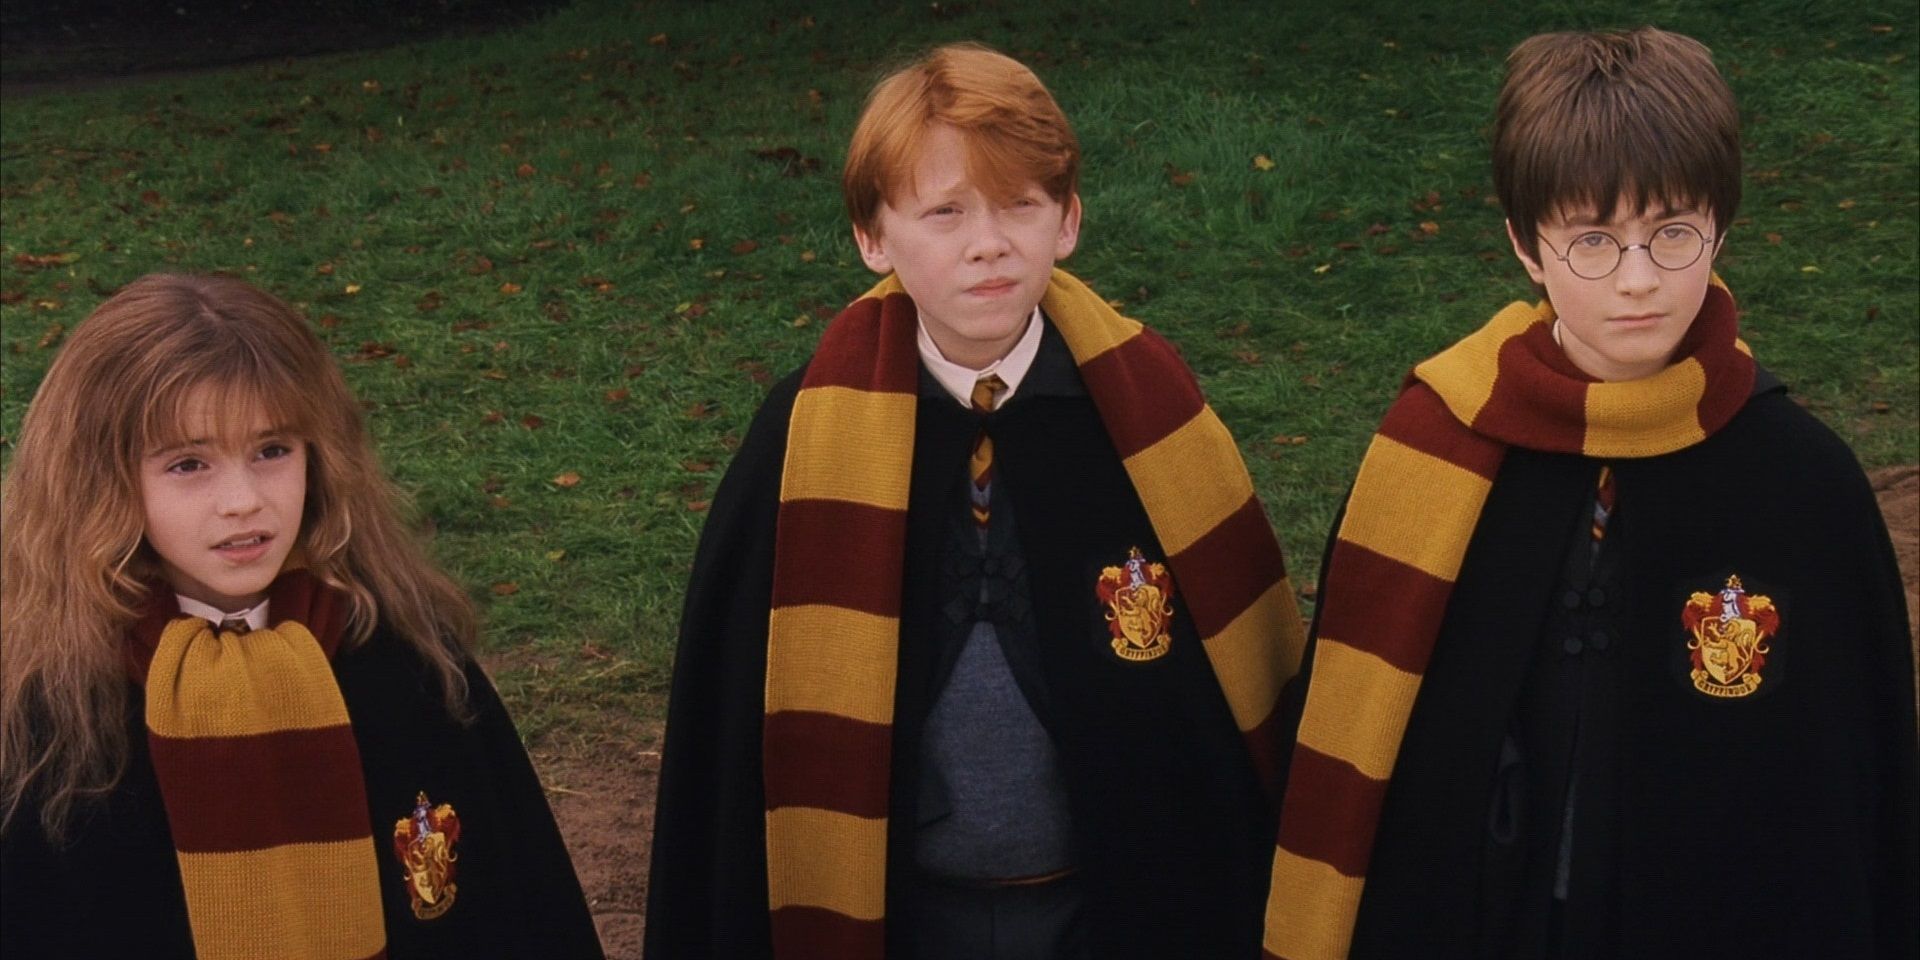 Harry, Ron, and Hermione look up in Harry Potter and the Sorcerer's Stone